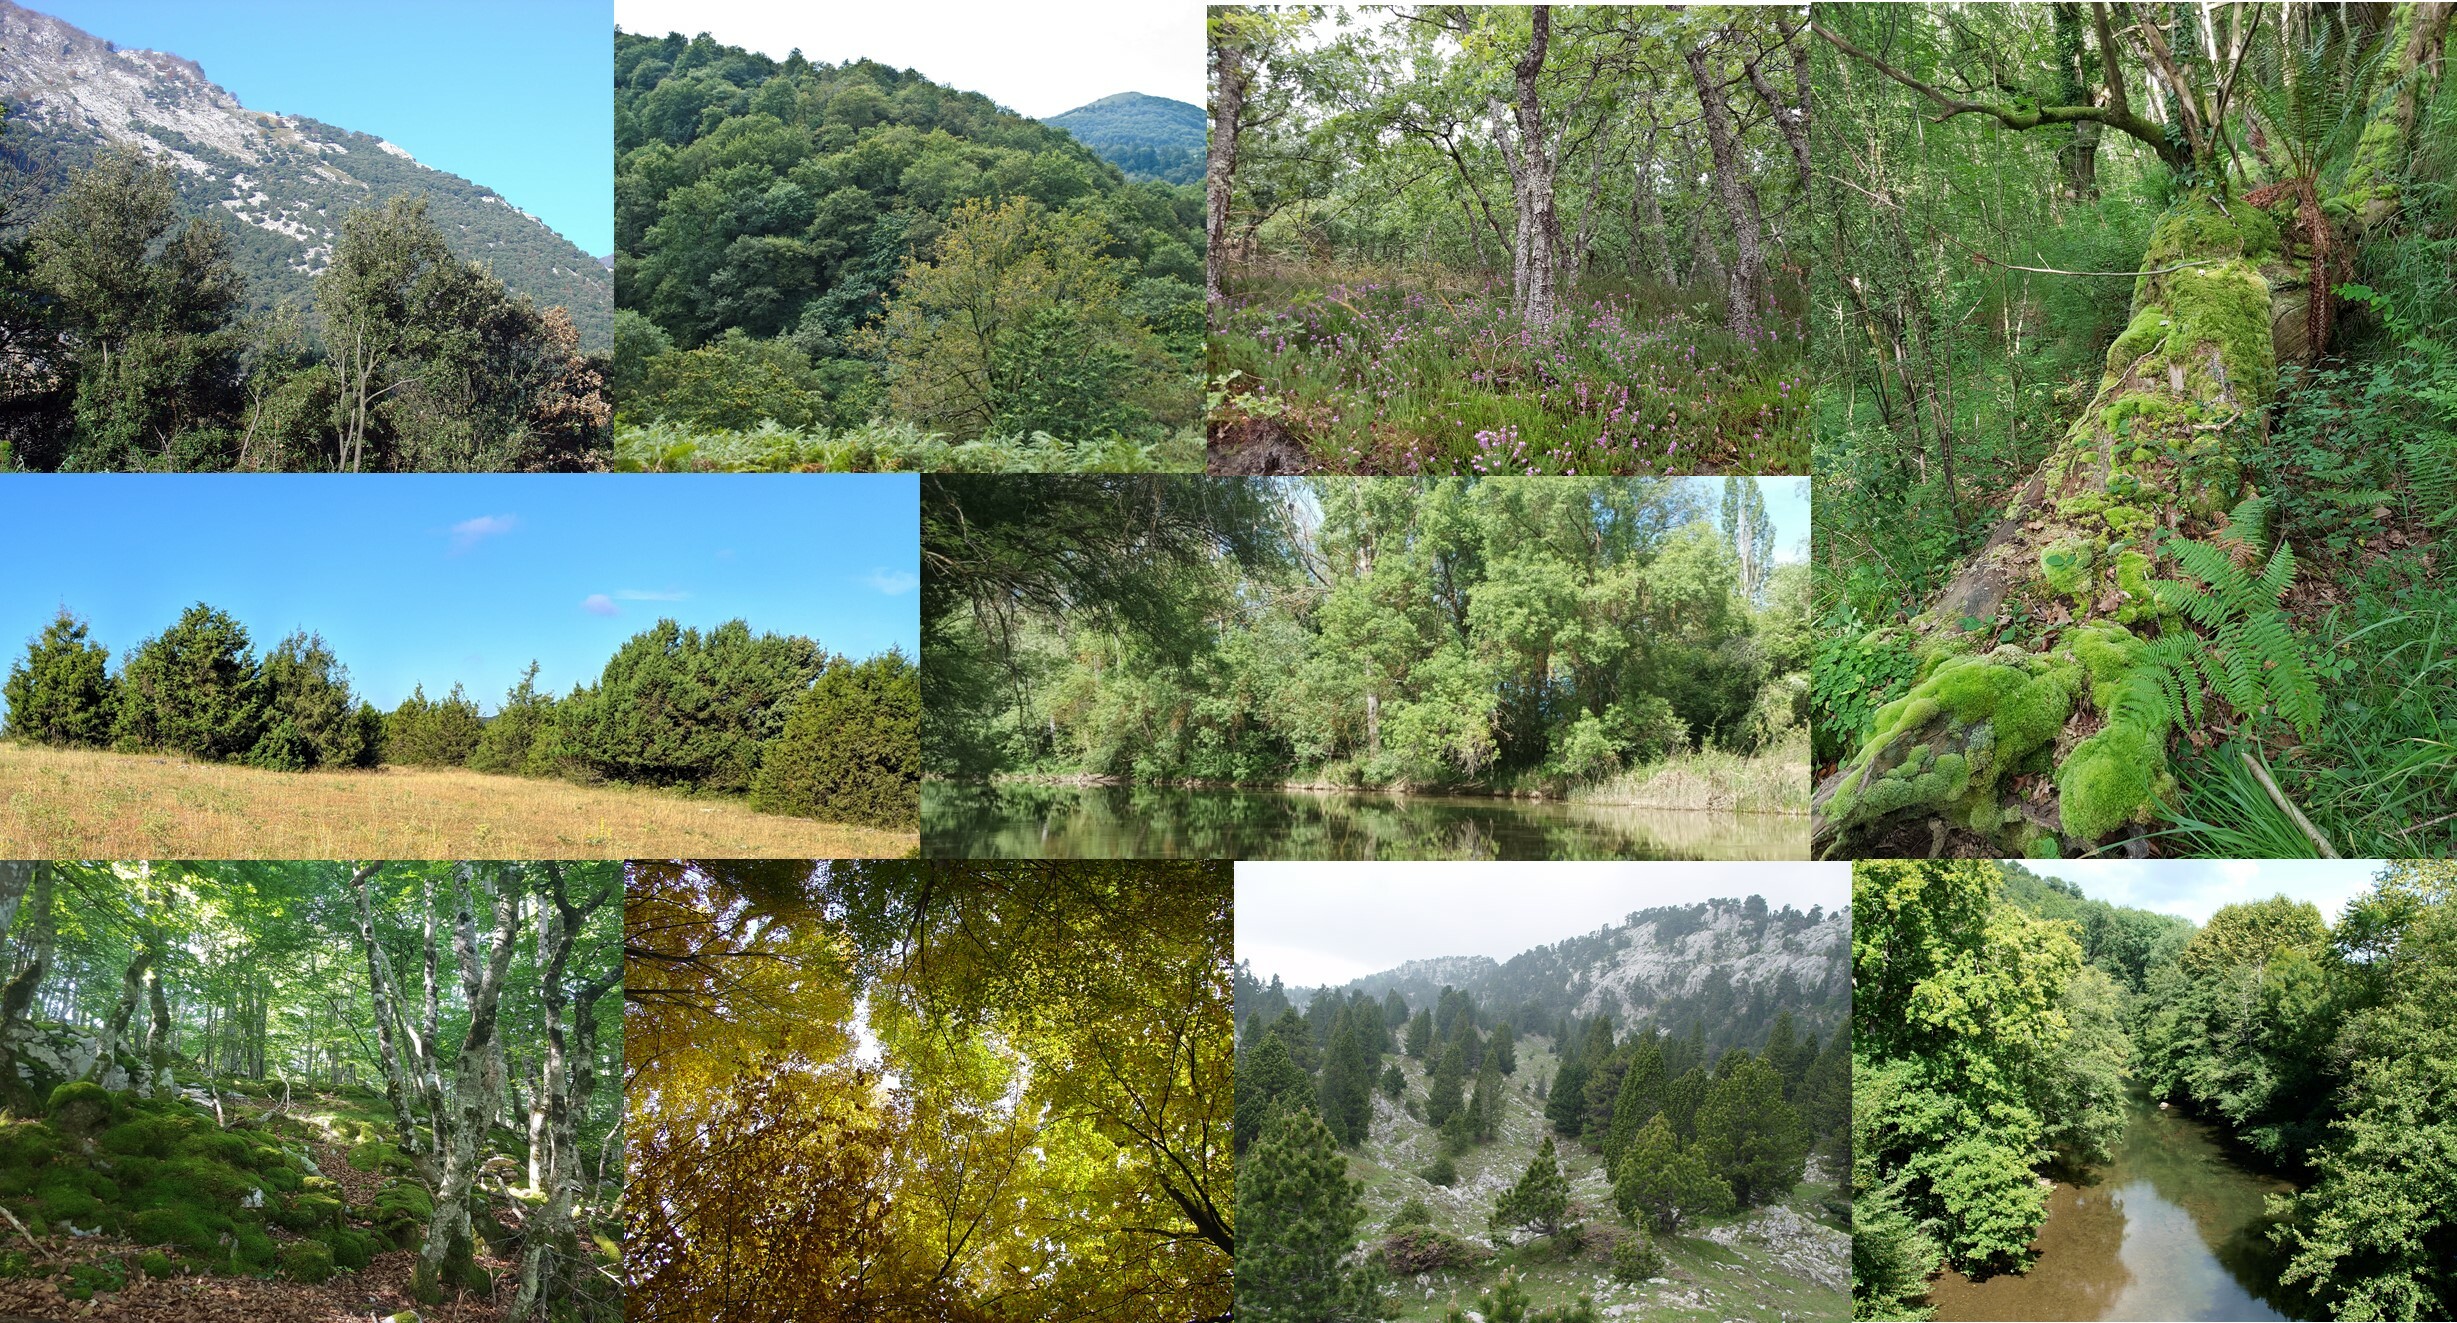 New Special Collection on classification and diversity of European forests and forest fringes launched by VCS